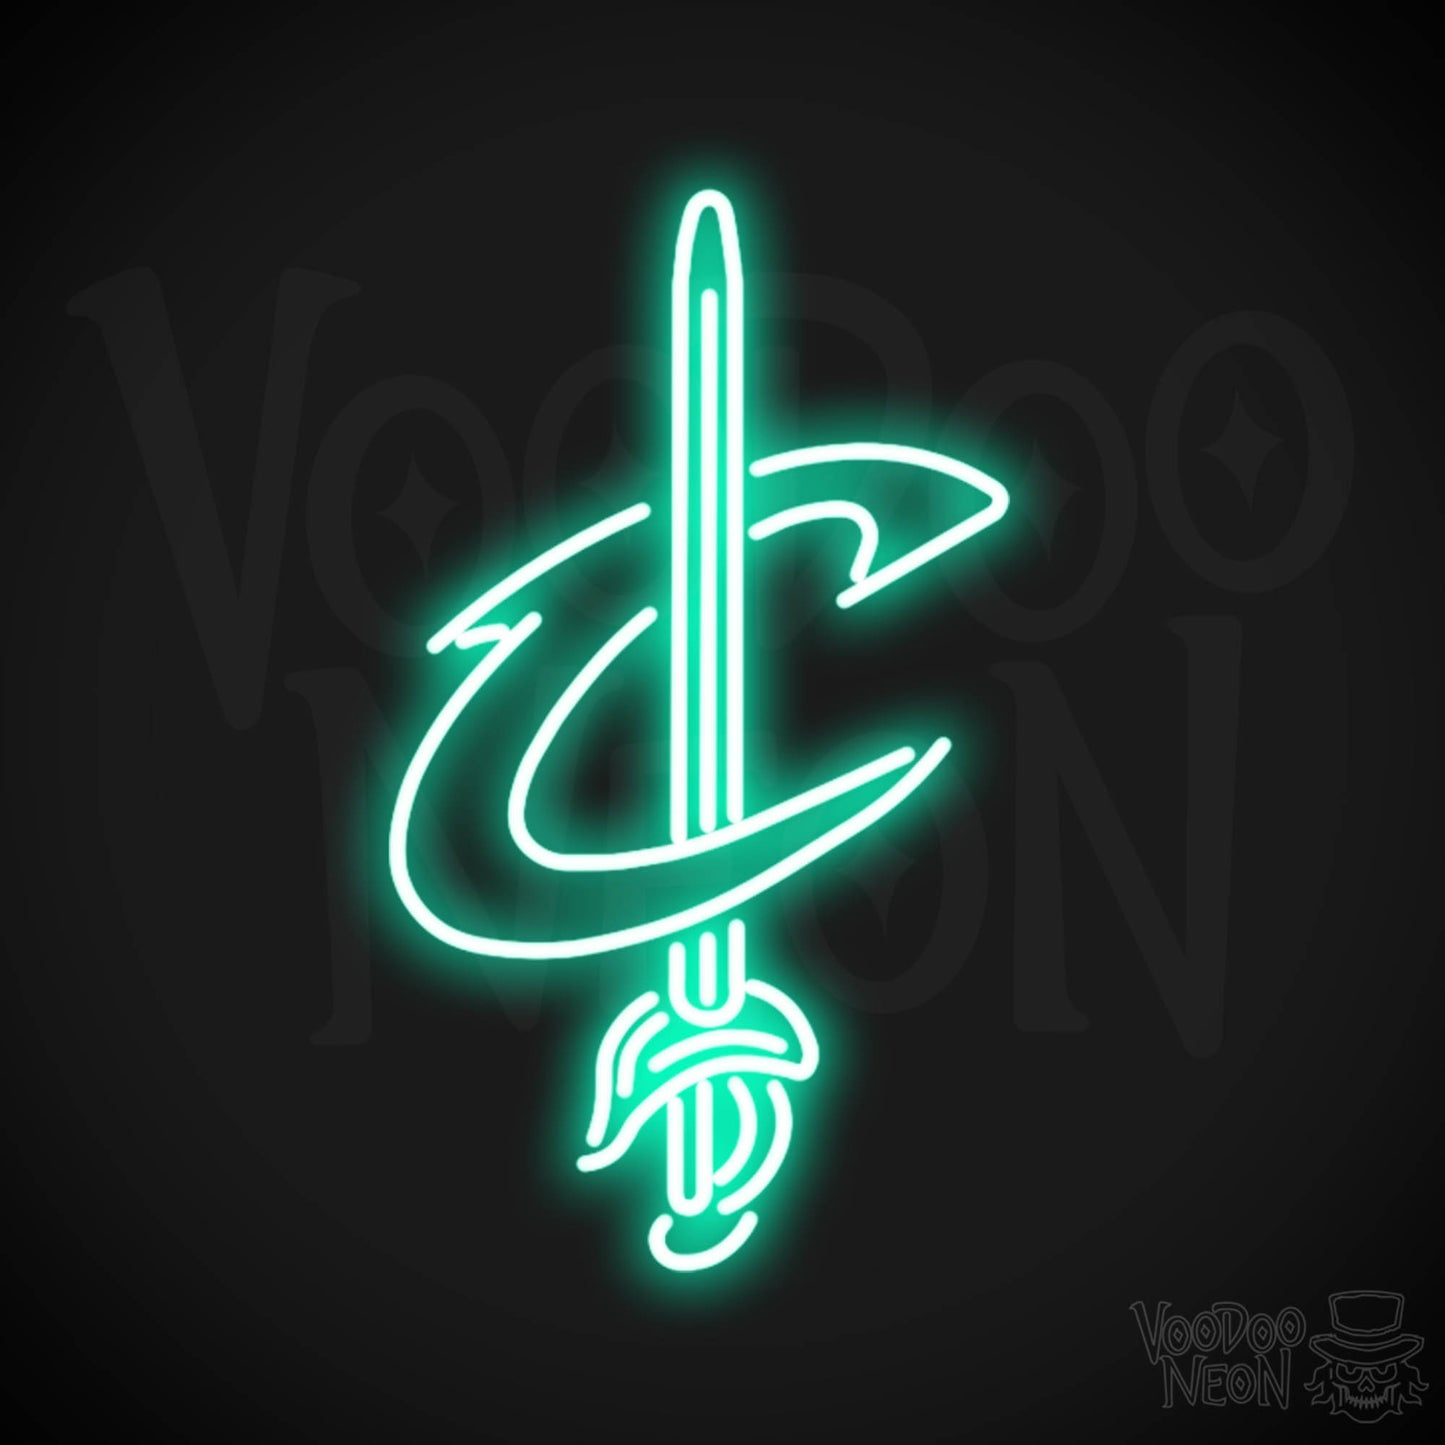 Cleveland Cavaliers Neon Sign - Cleveland Cavaliers Sign - Neon Cavaliers Wall Art - Color Light Green